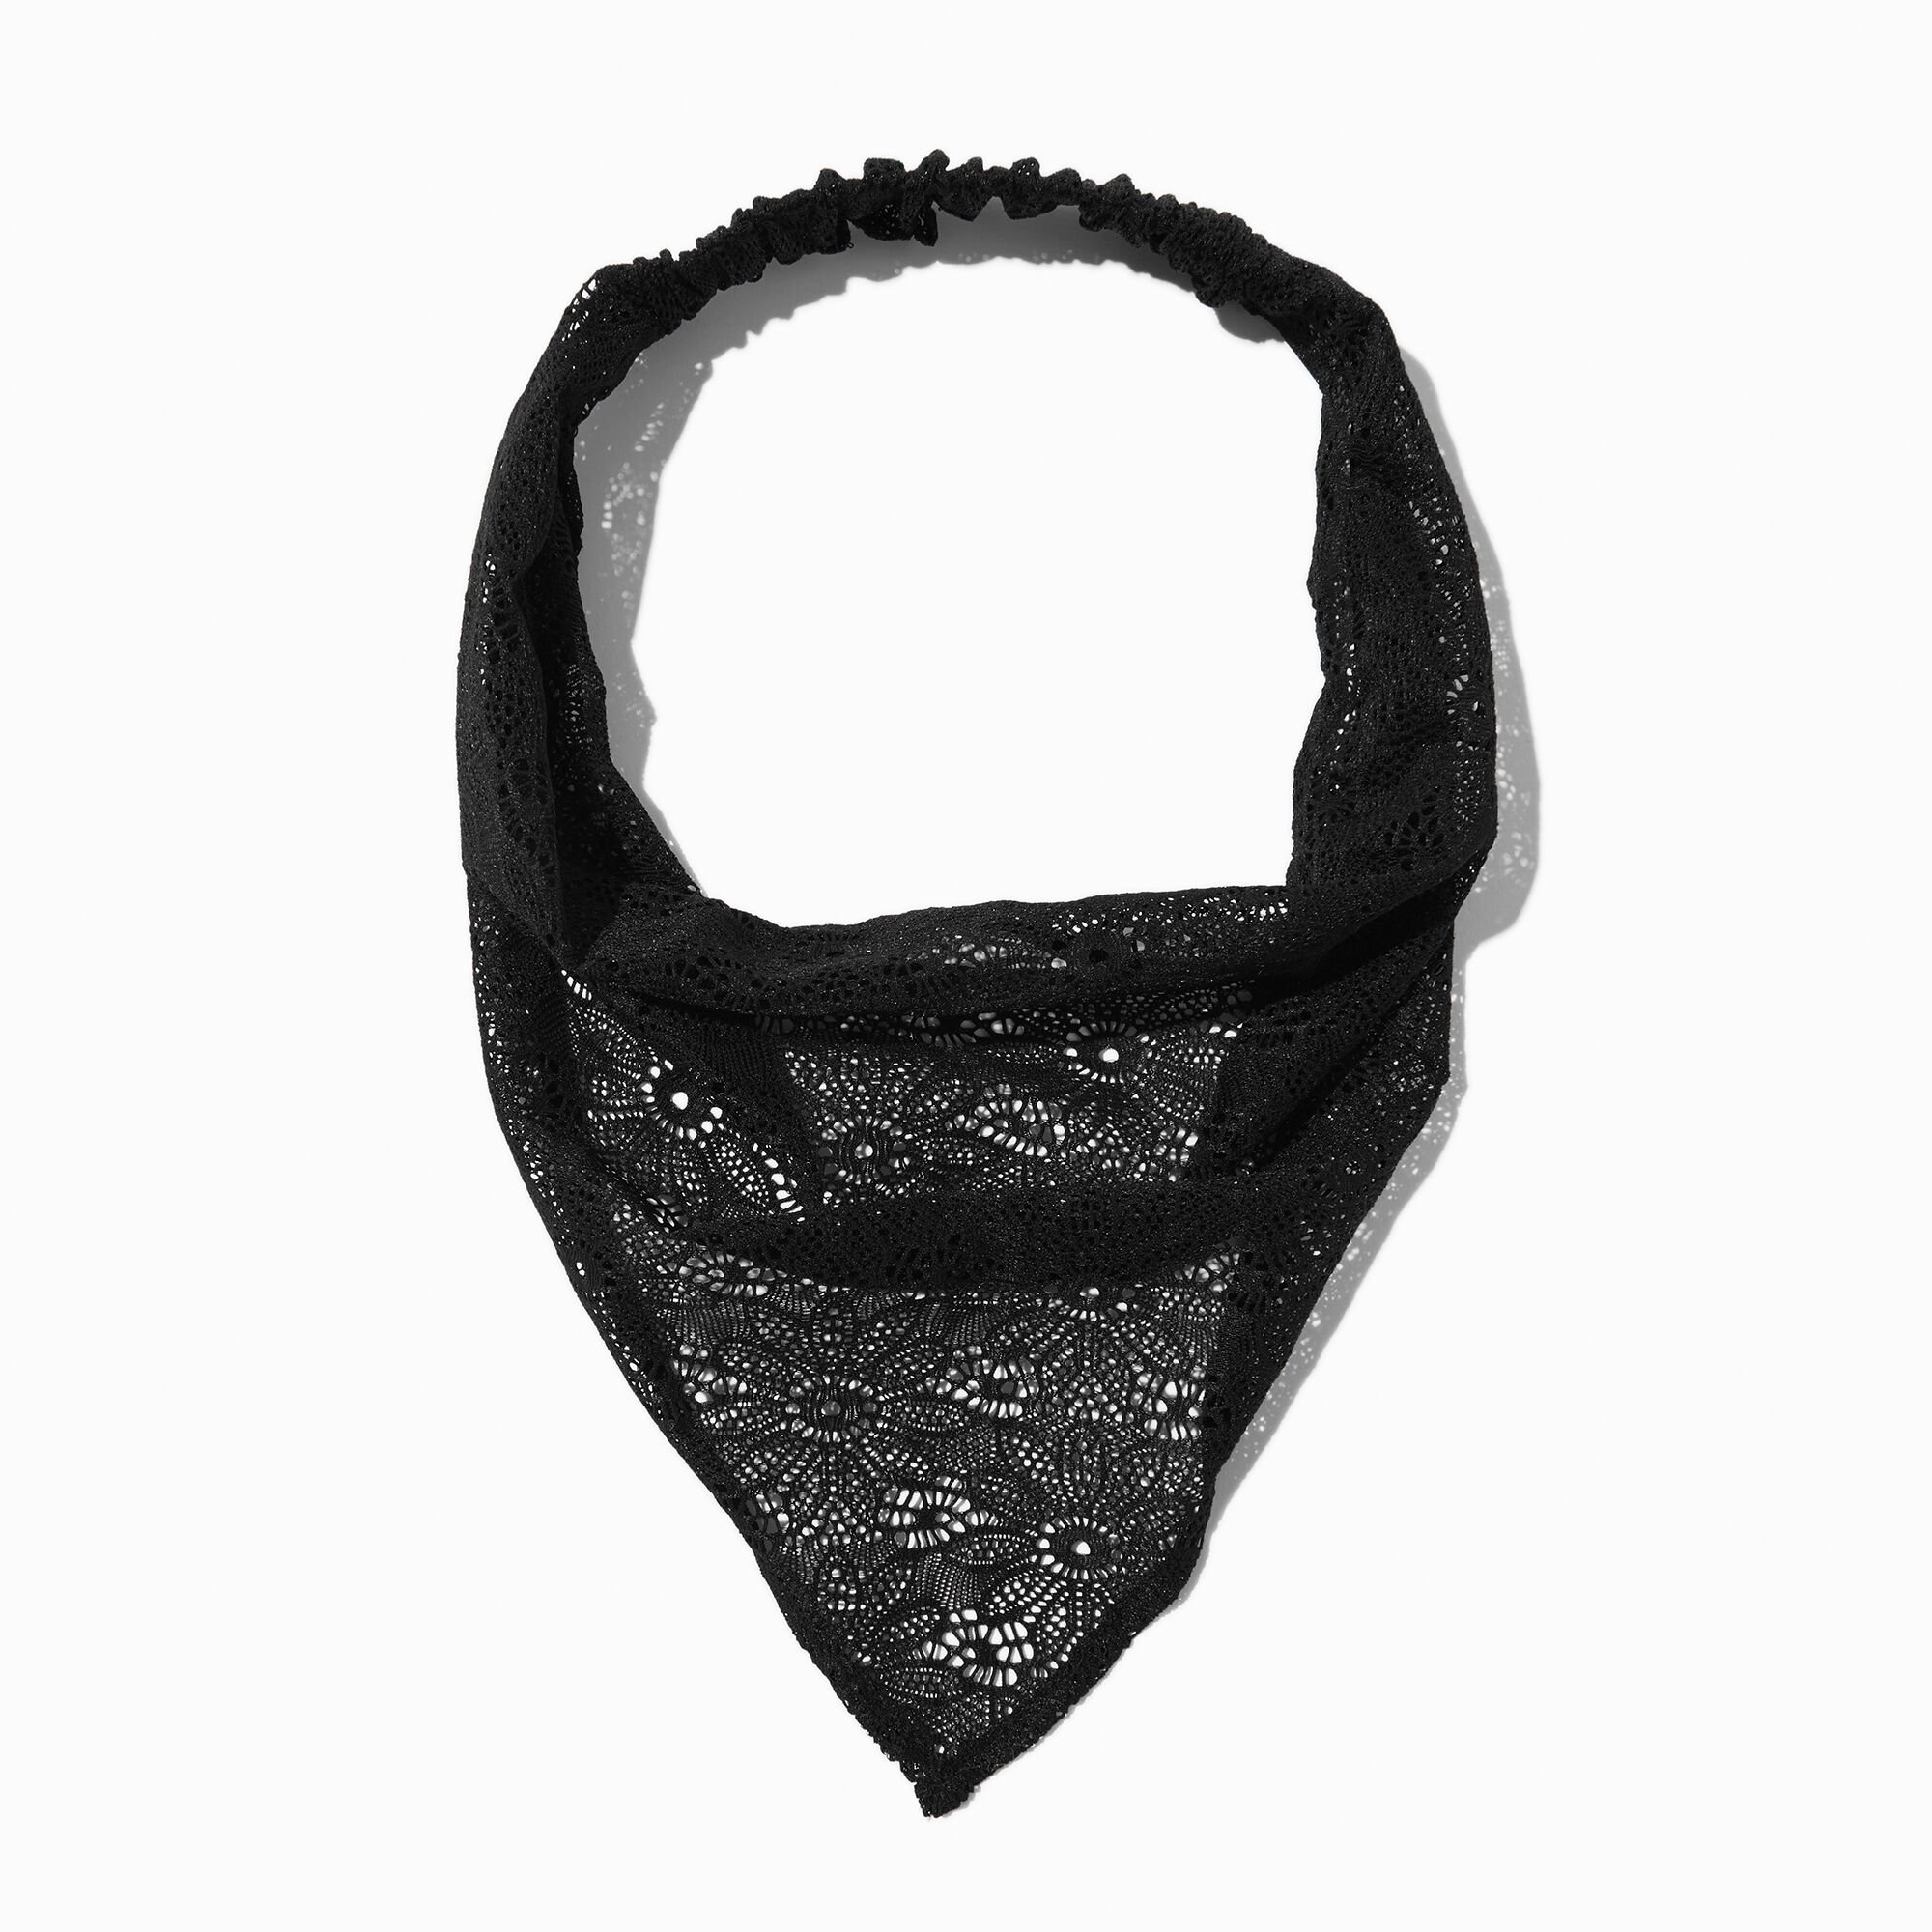 View Claires Floral Lace Head Scarf Black information